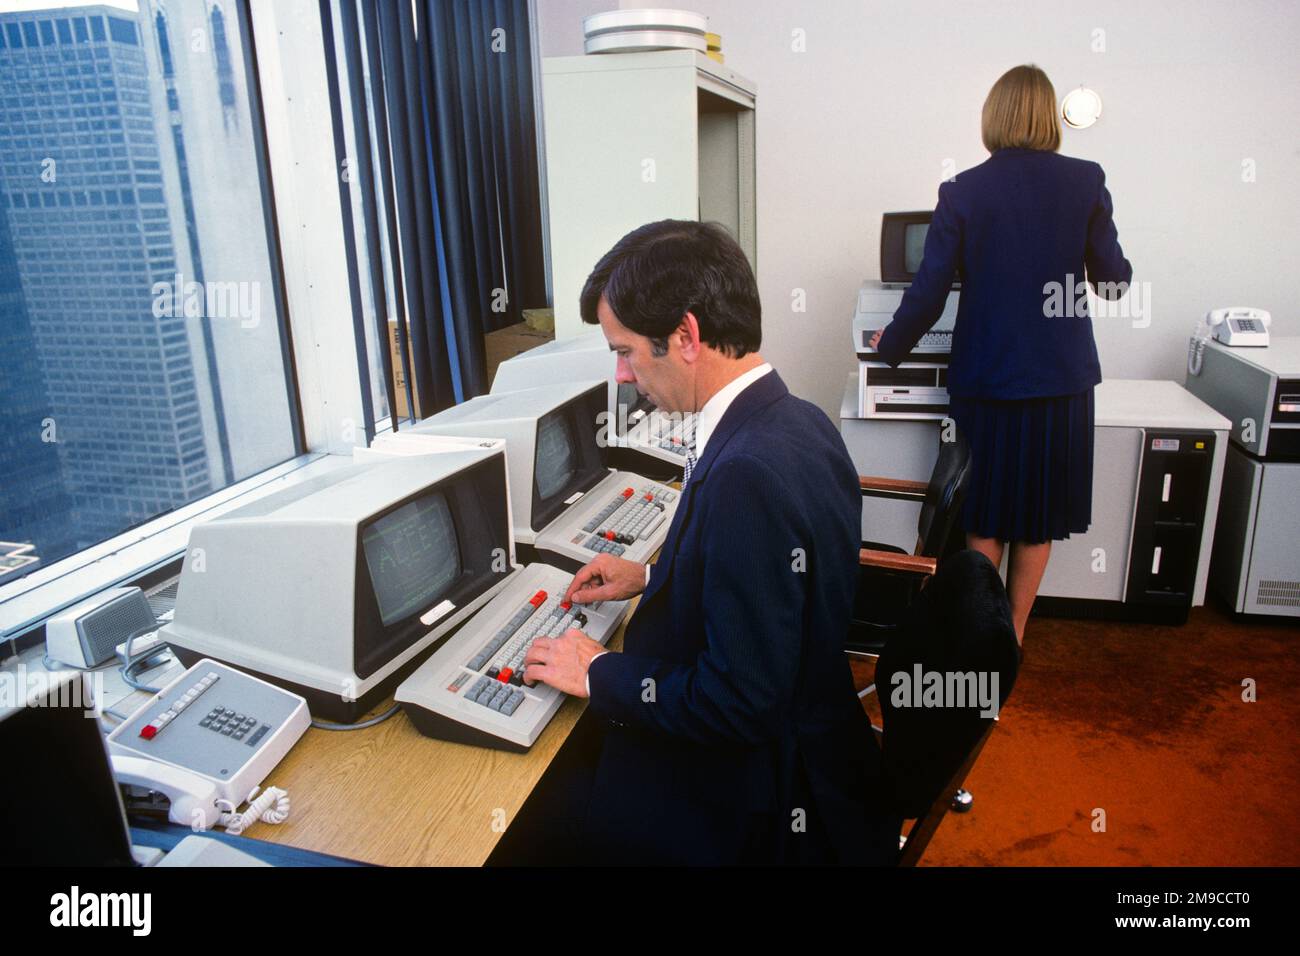 1980s MAN AND WOMAN WORKING IN COMPUTER OFFICE - ko1312 PHT001 HARS LADIES COMPUTERS PERSONS MALES PROFESSION EXECUTIVES SKILL SUIT AND TIE OCCUPATION SKILLS AND CAREERS MONITORS PROGRESS INNOVATION OCCUPATIONS HIGH TECH MONITOR SUPPORT COOPERATION MANAGERS MID-ADULT MID-ADULT MAN MID-ADULT WOMAN SOLUTIONS CAUCASIAN ETHNICITY COMPUTING OLD FASHIONED Stock Photo